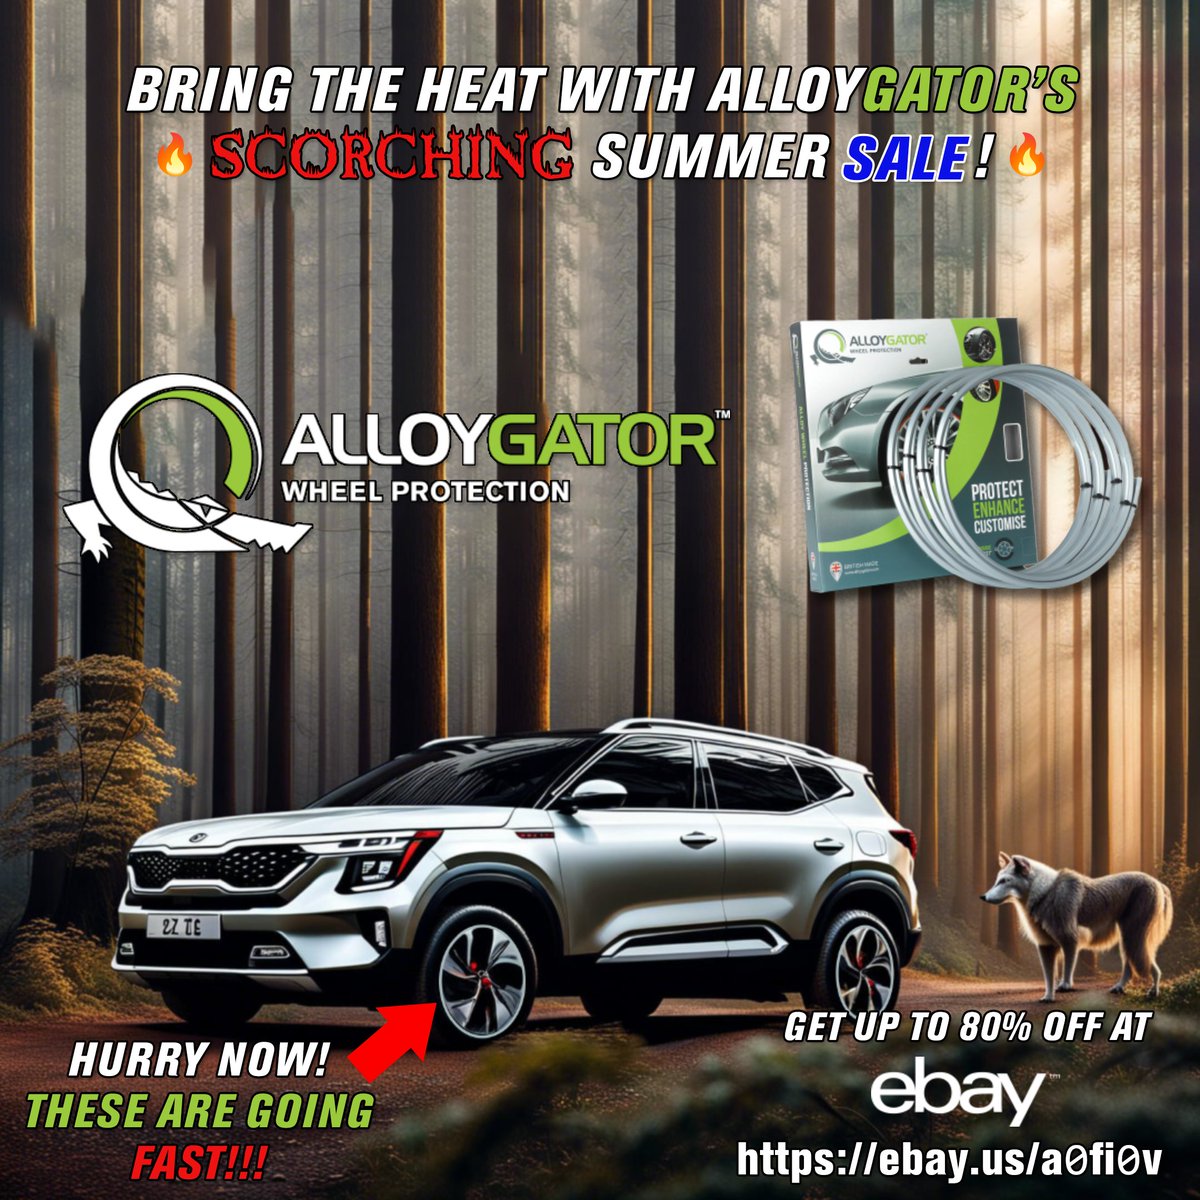 #advertisement #affiliate Find the hottest deals at #AlloyGator's SCORCHING Summer Sale! Find them on #eBay here: ebay.us/a0fi0v You won't find this deal anywhere else! #carshow #protection #nizelco #discount #marketing #onlinestore #cars #trucks #rims #wheels #silver